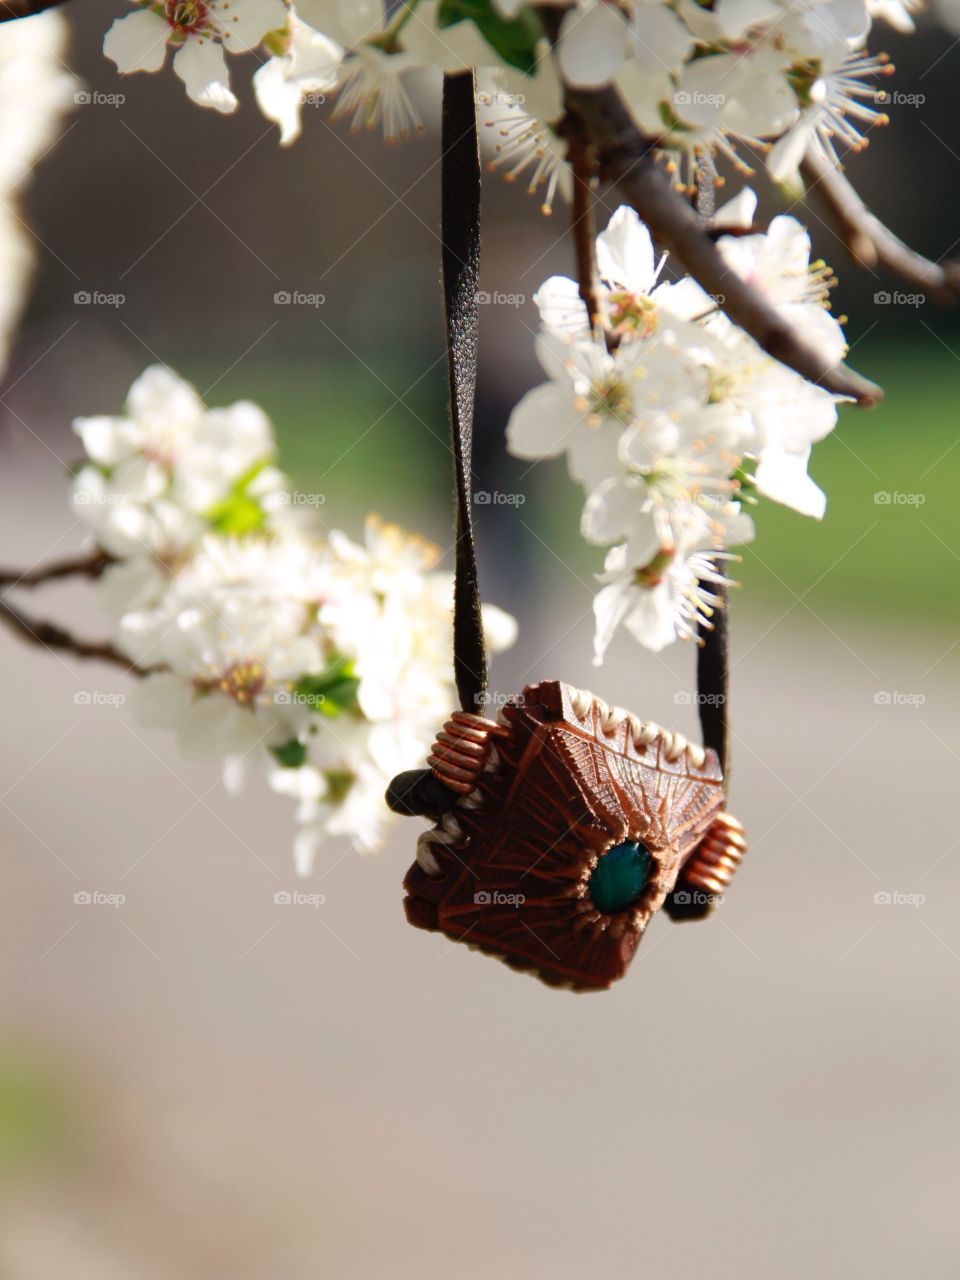 Spring photography